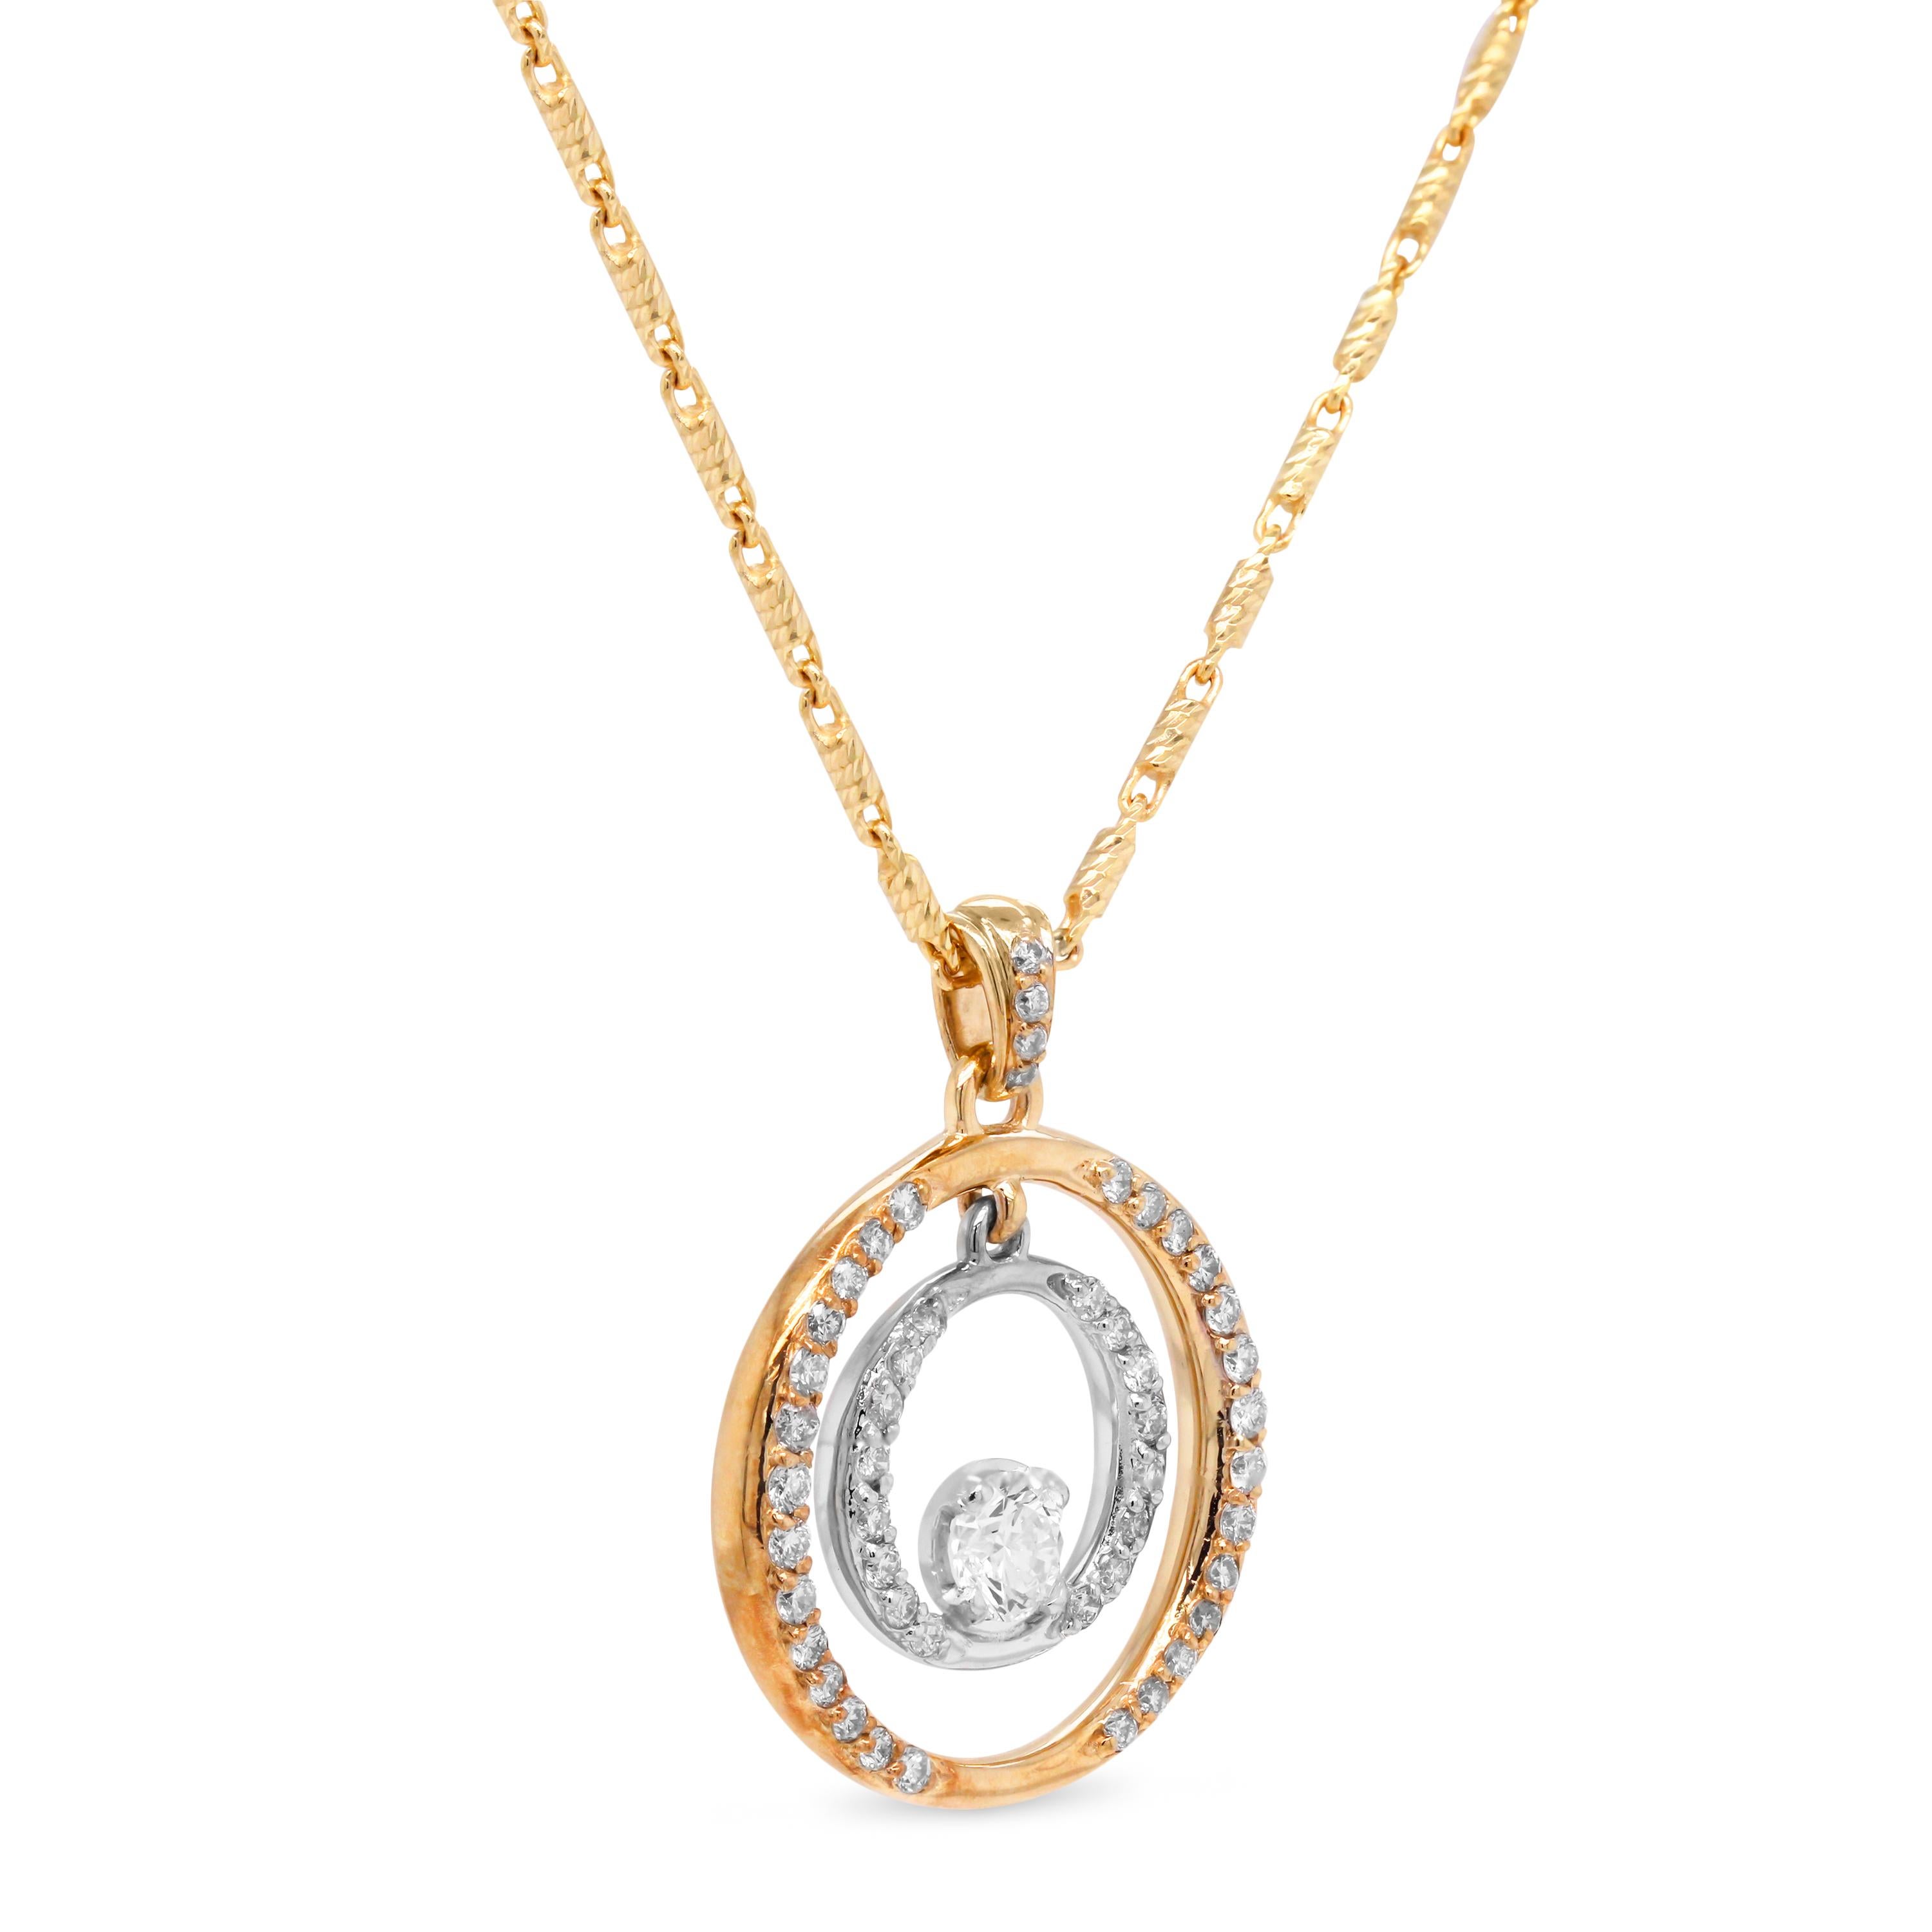 14K Yellow White Gold Diamonds 0.40 Carat Center Circle Pendant Chain Necklace

1.28 carat G color, VS clarity diamonds total weight. 0.40 carat diamond center.

This two-tone gold necklace features a 14K yellow gold chain with a two circle pendant